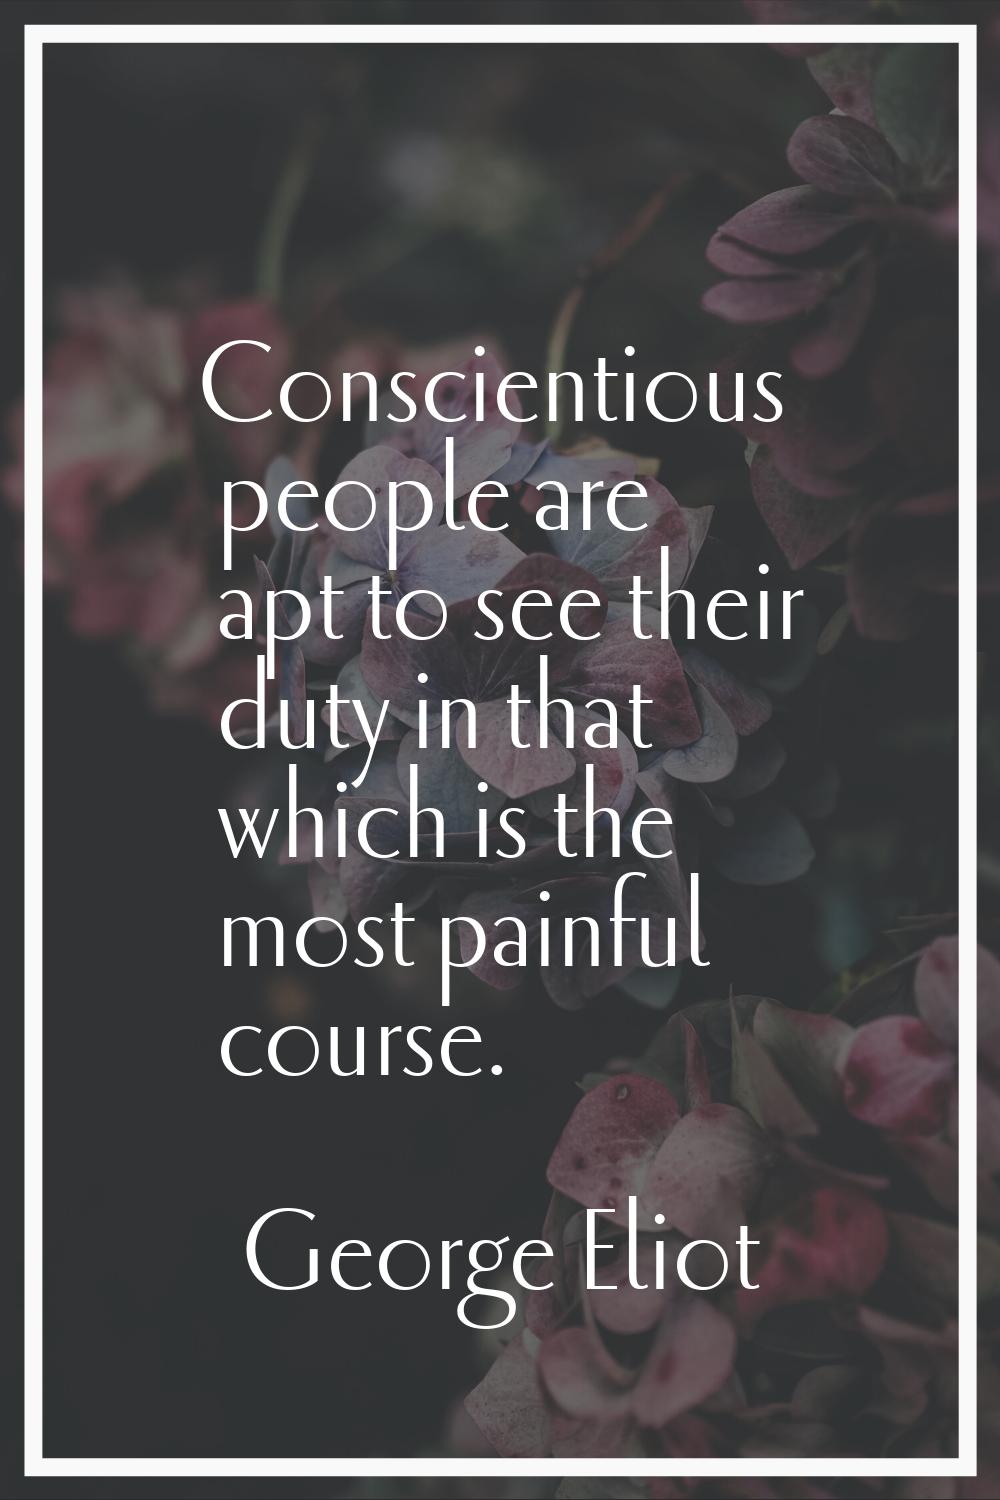 Conscientious people are apt to see their duty in that which is the most painful course.